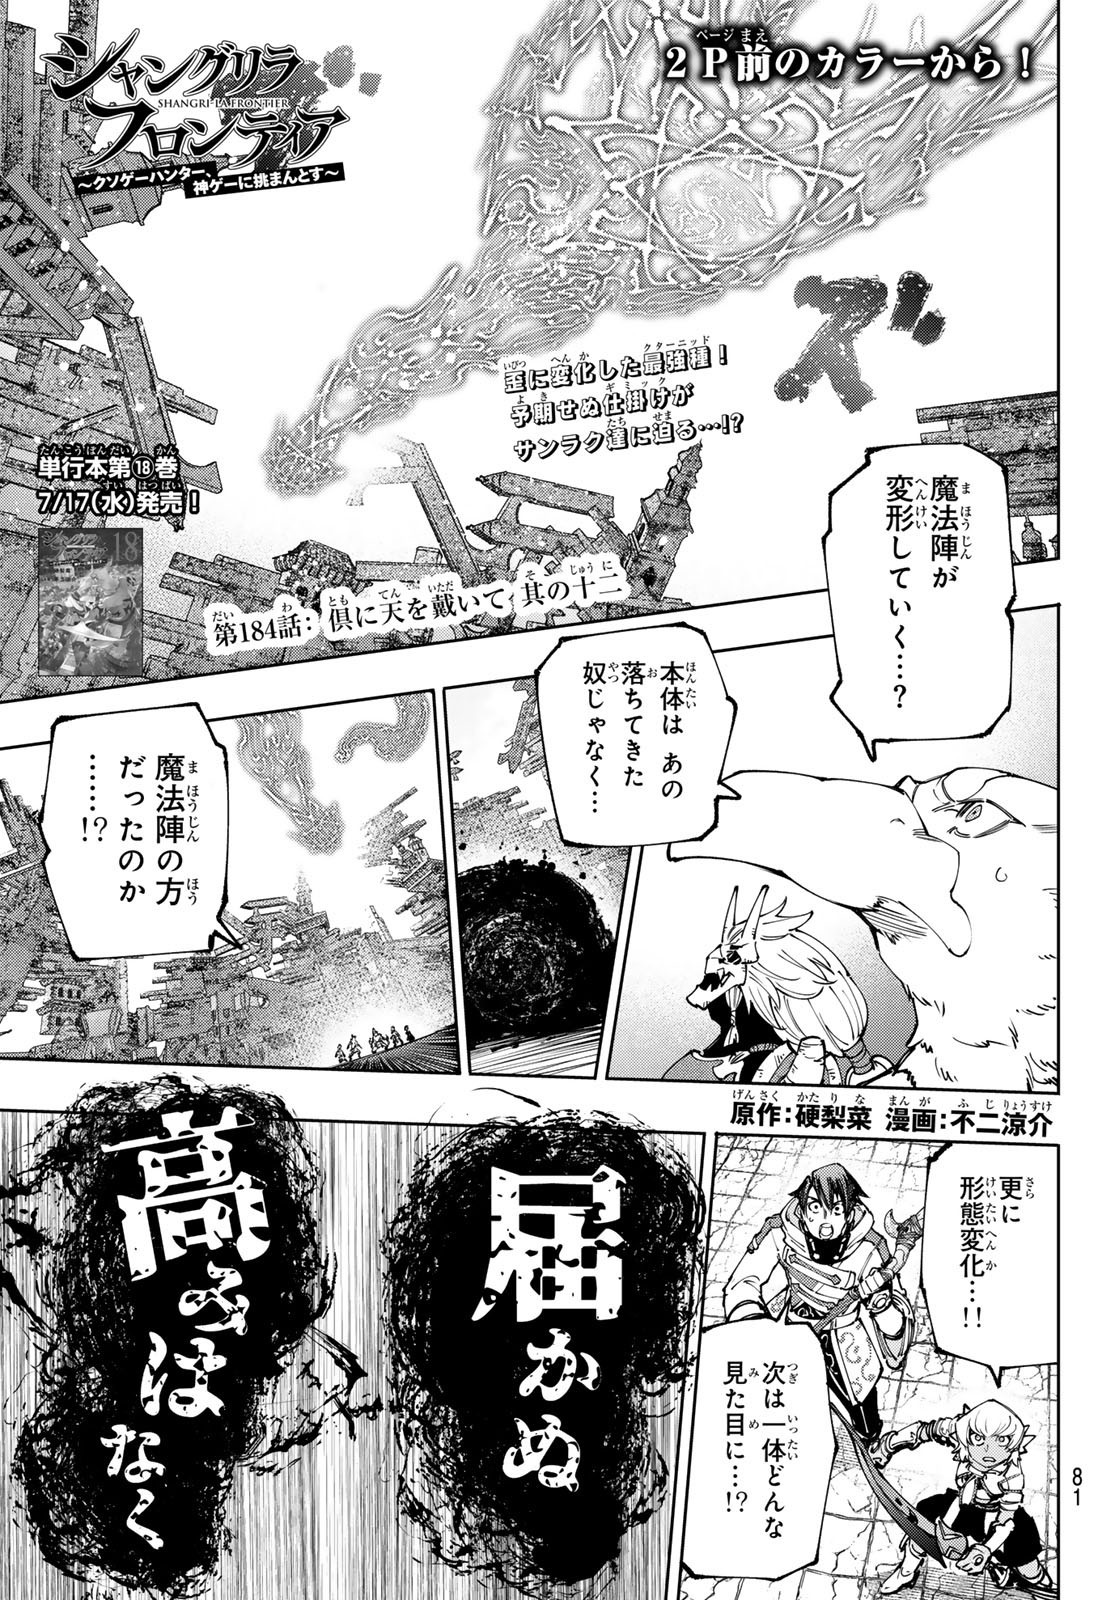 Weekly Shōnen Magazine - 週刊少年マガジン - Chapter 2024-32 - Page 79